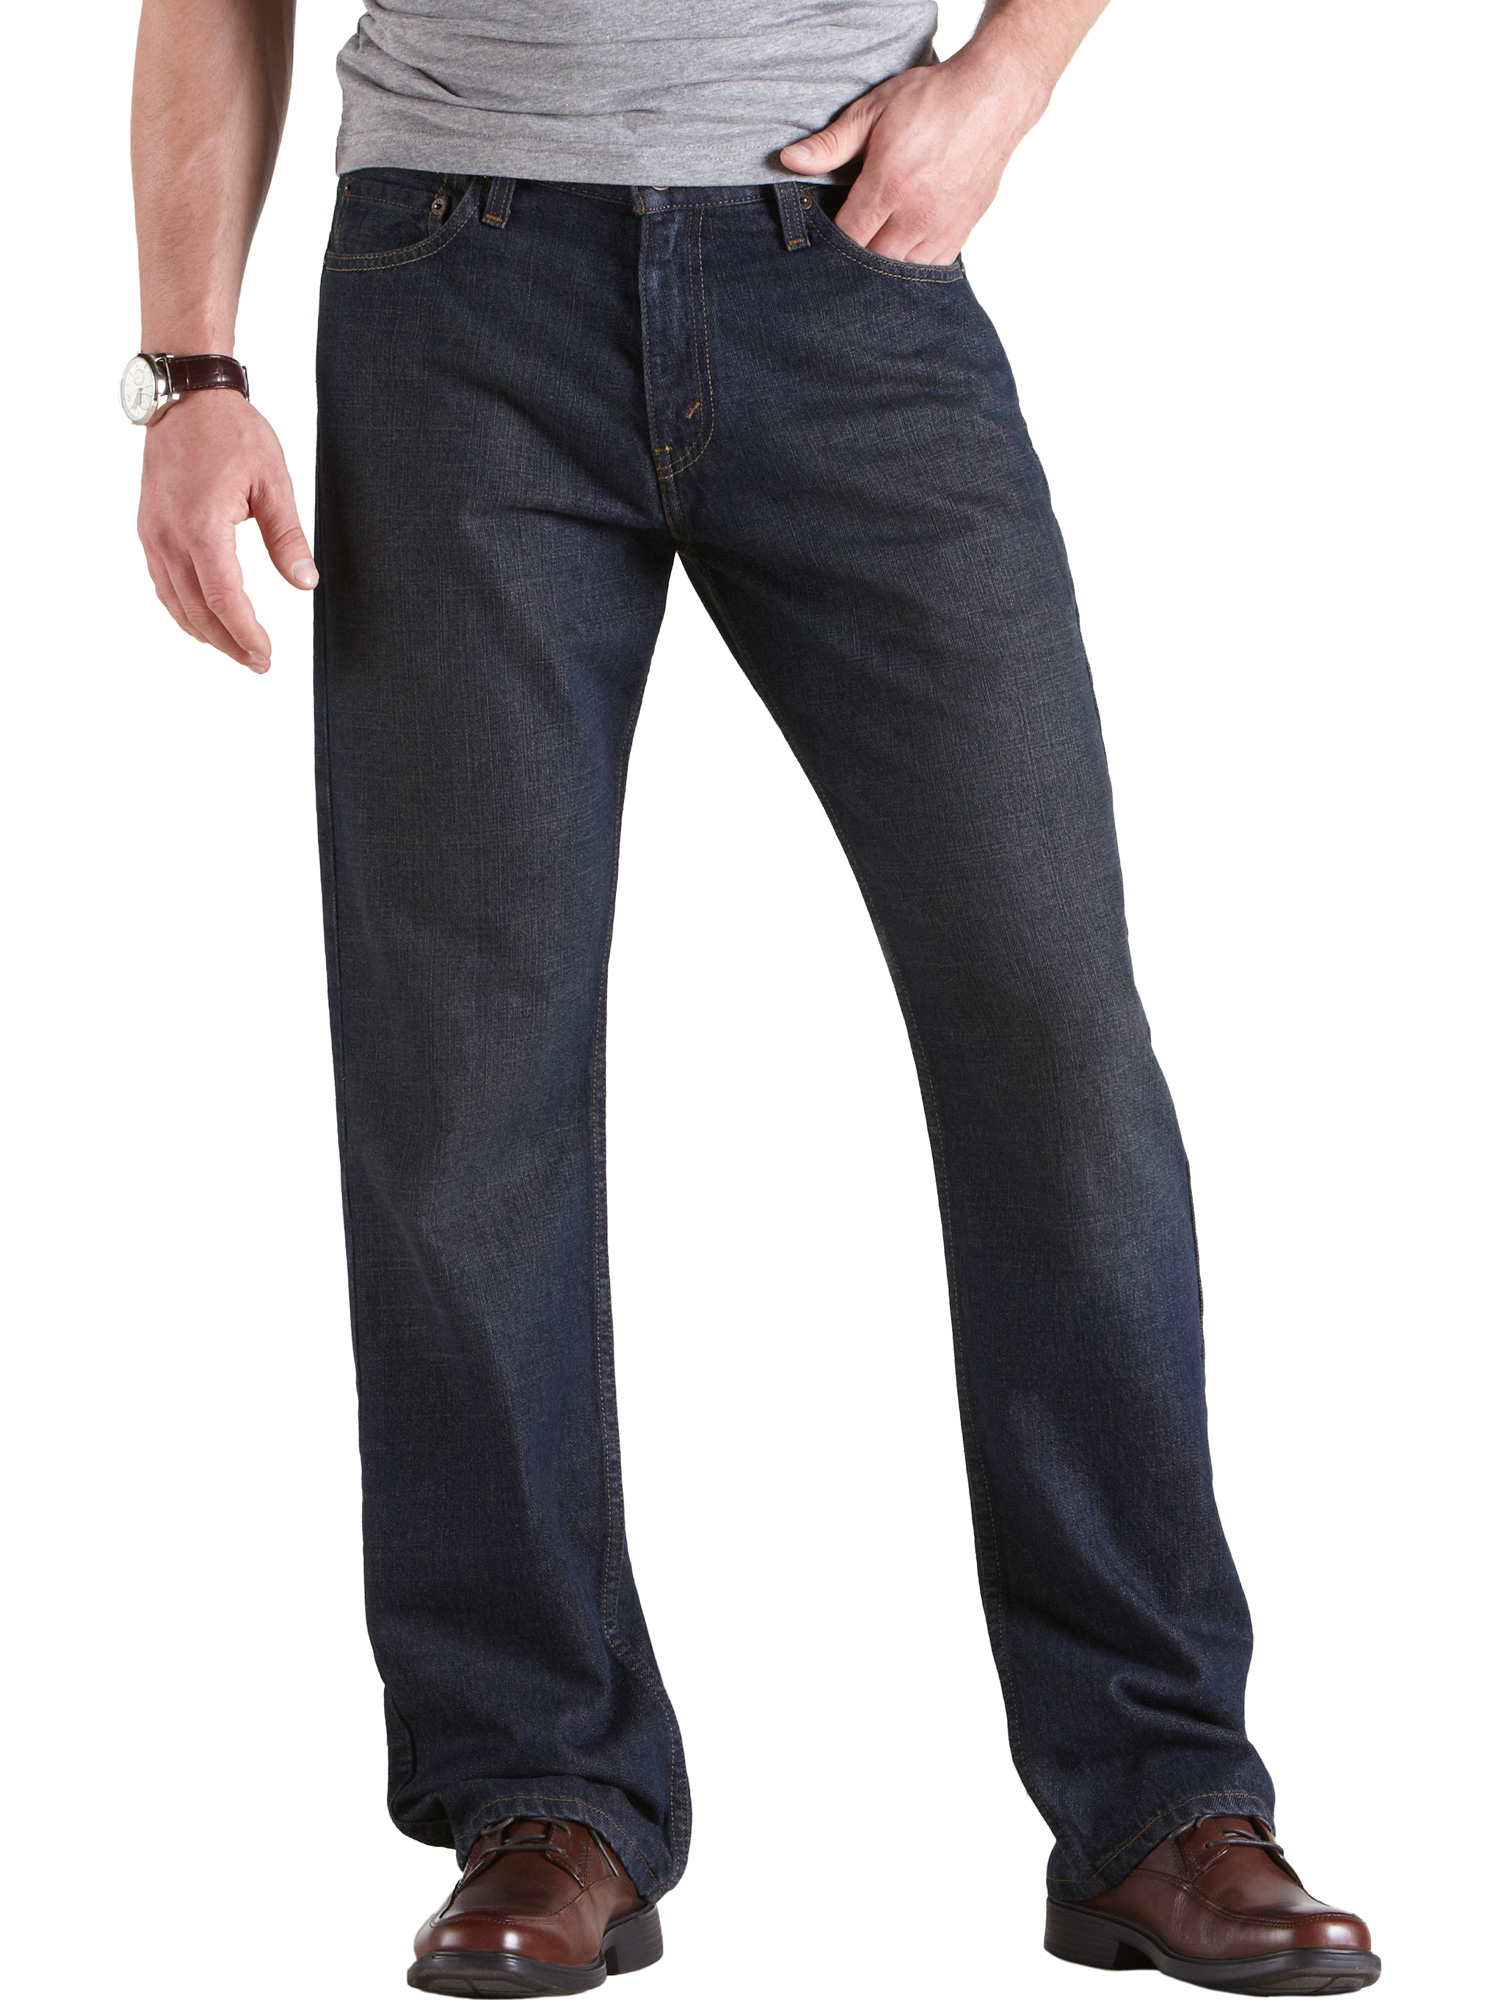 Signature By Levi Strauss & Co. Men's Straight Fit Jeans - image 1 of 4